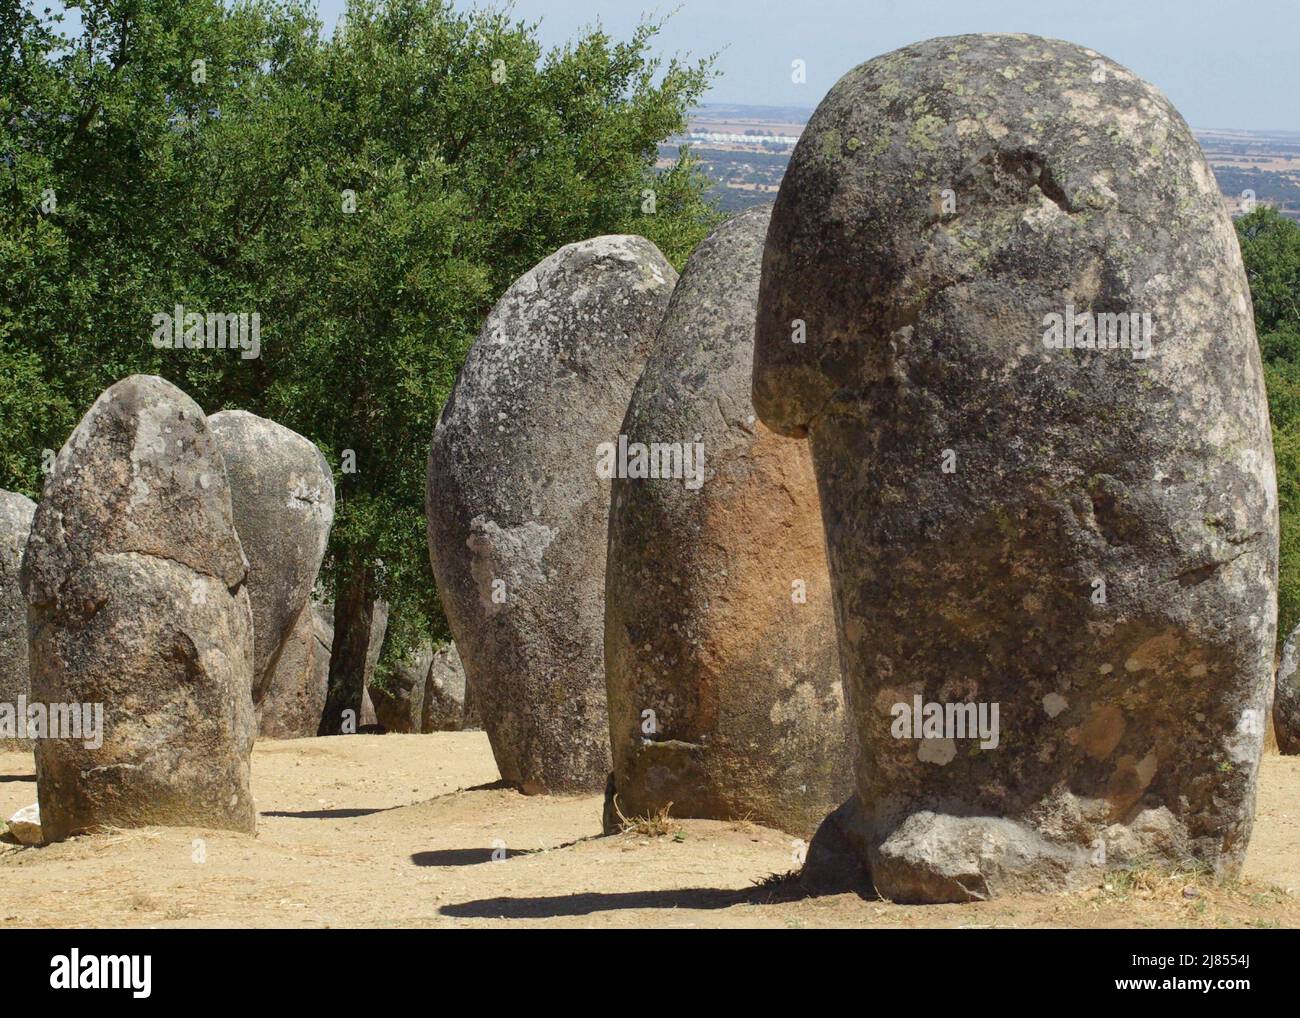 Long rows of standing stone megaliths at neolithic site in southern Portugal cast shadows in the late summer sun. Stock Photo